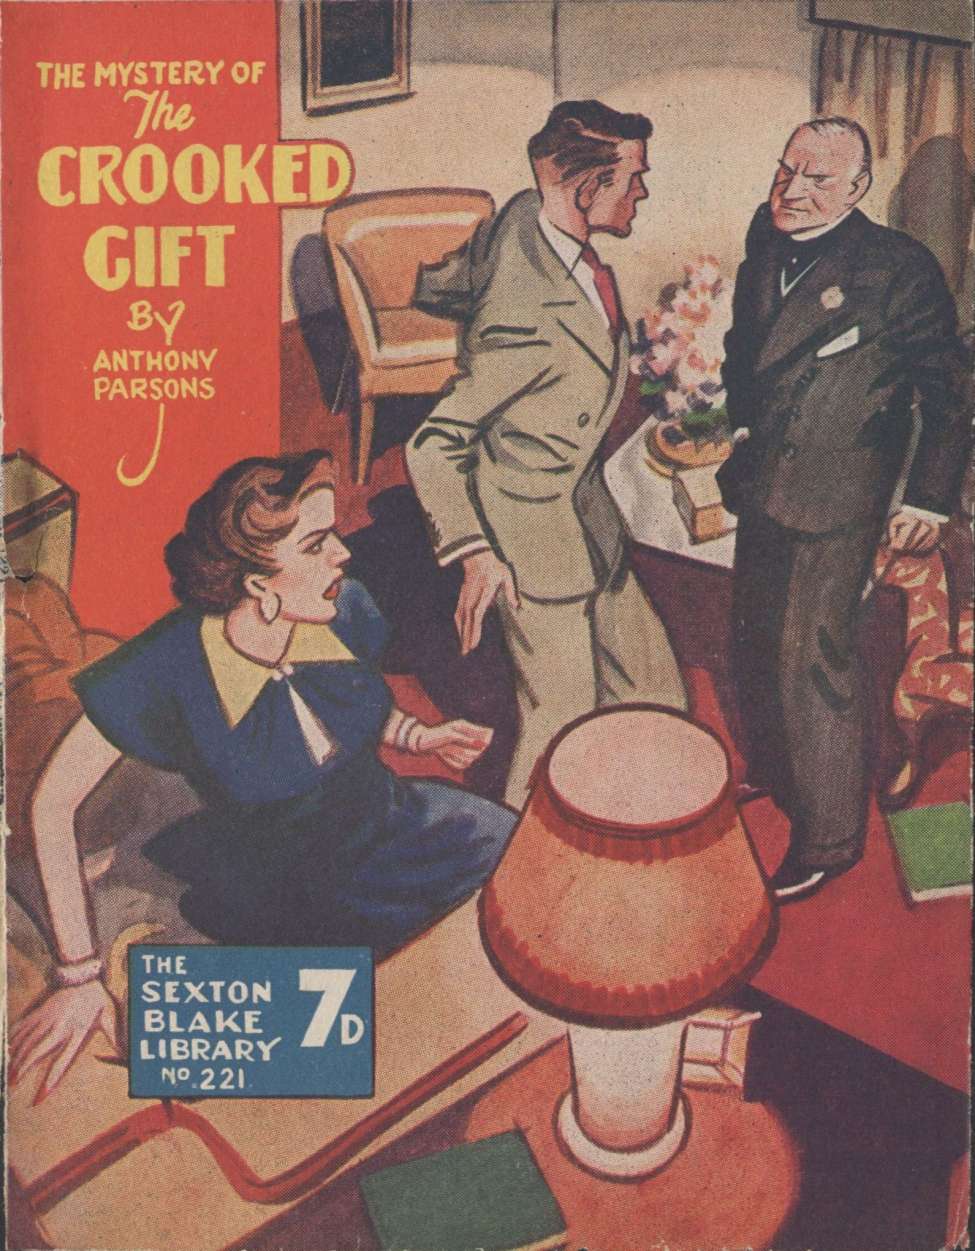 Book Cover For Sexton Blake Library S3 221 - The Mystery of the Crooked Gift